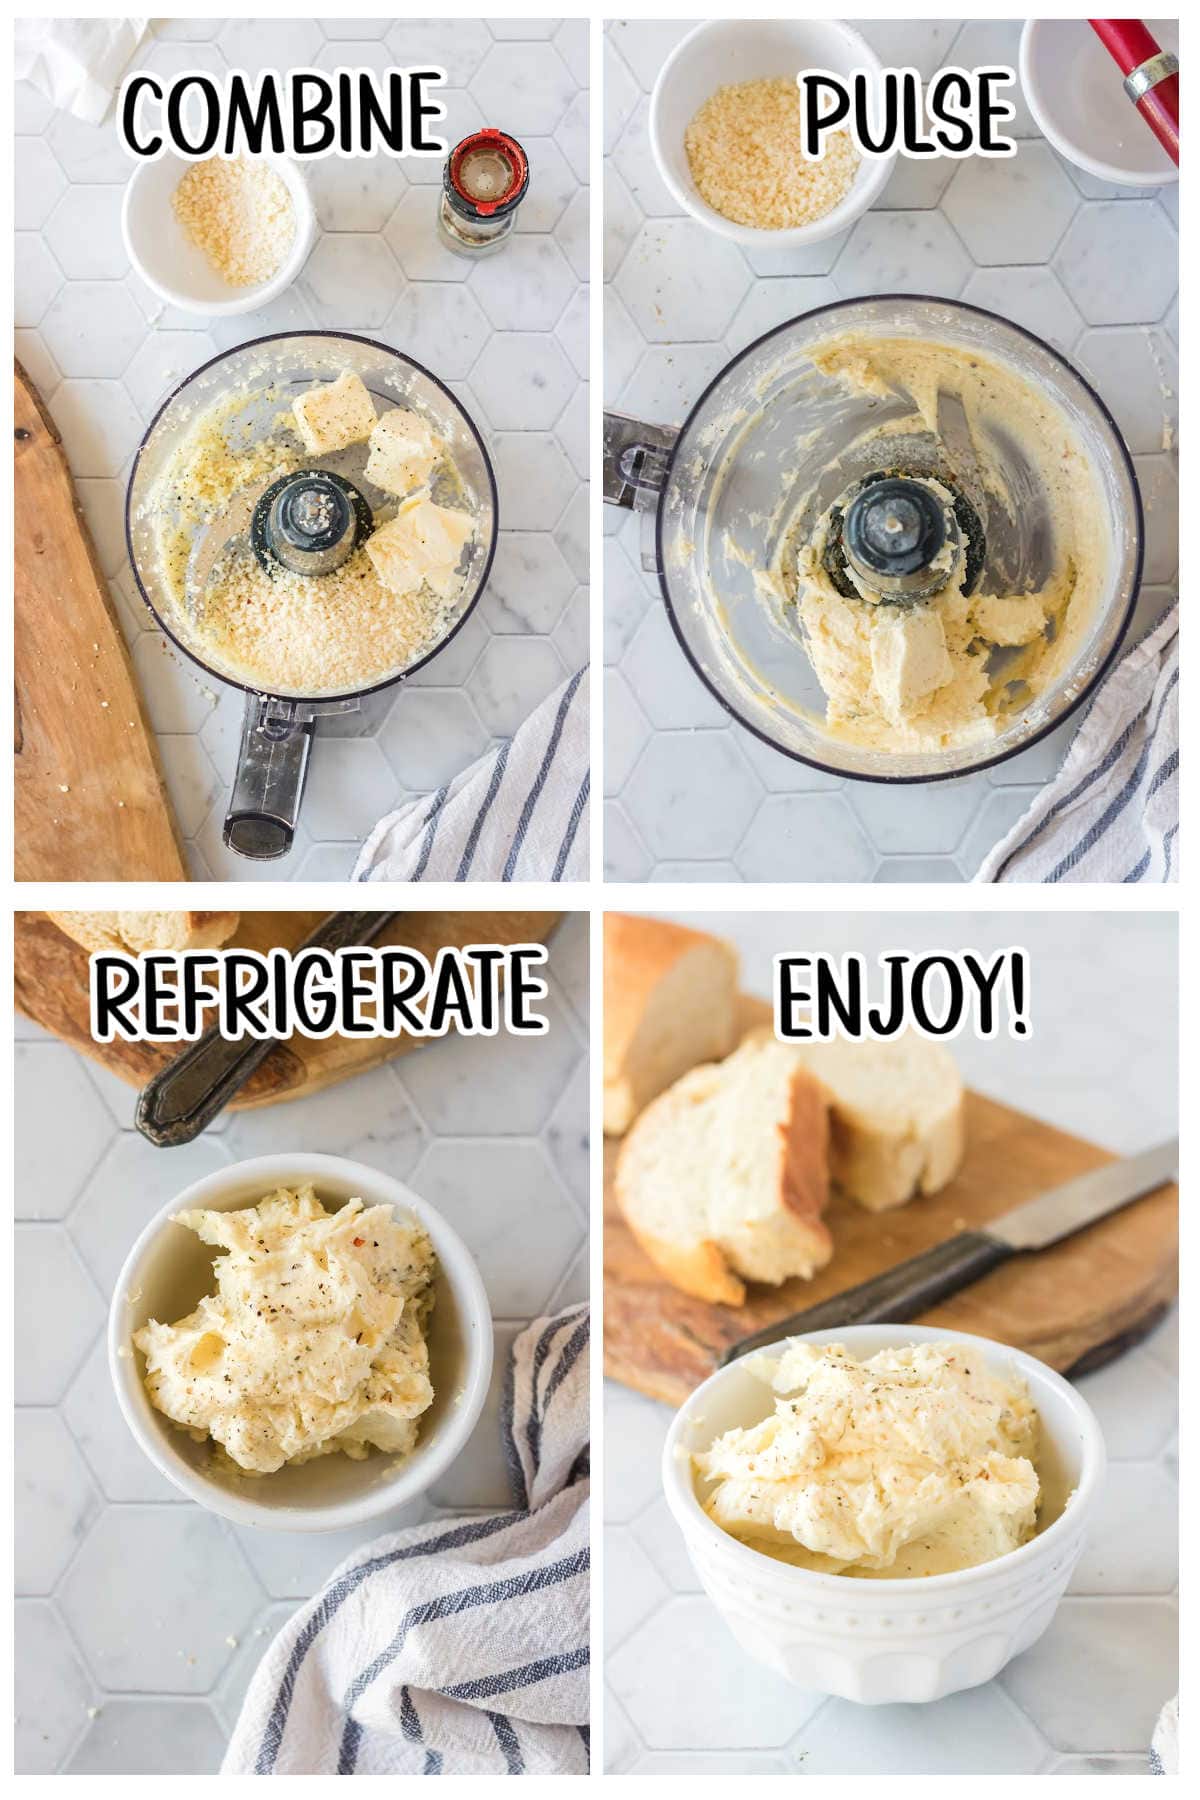 Step by step instructions for garlic butter.